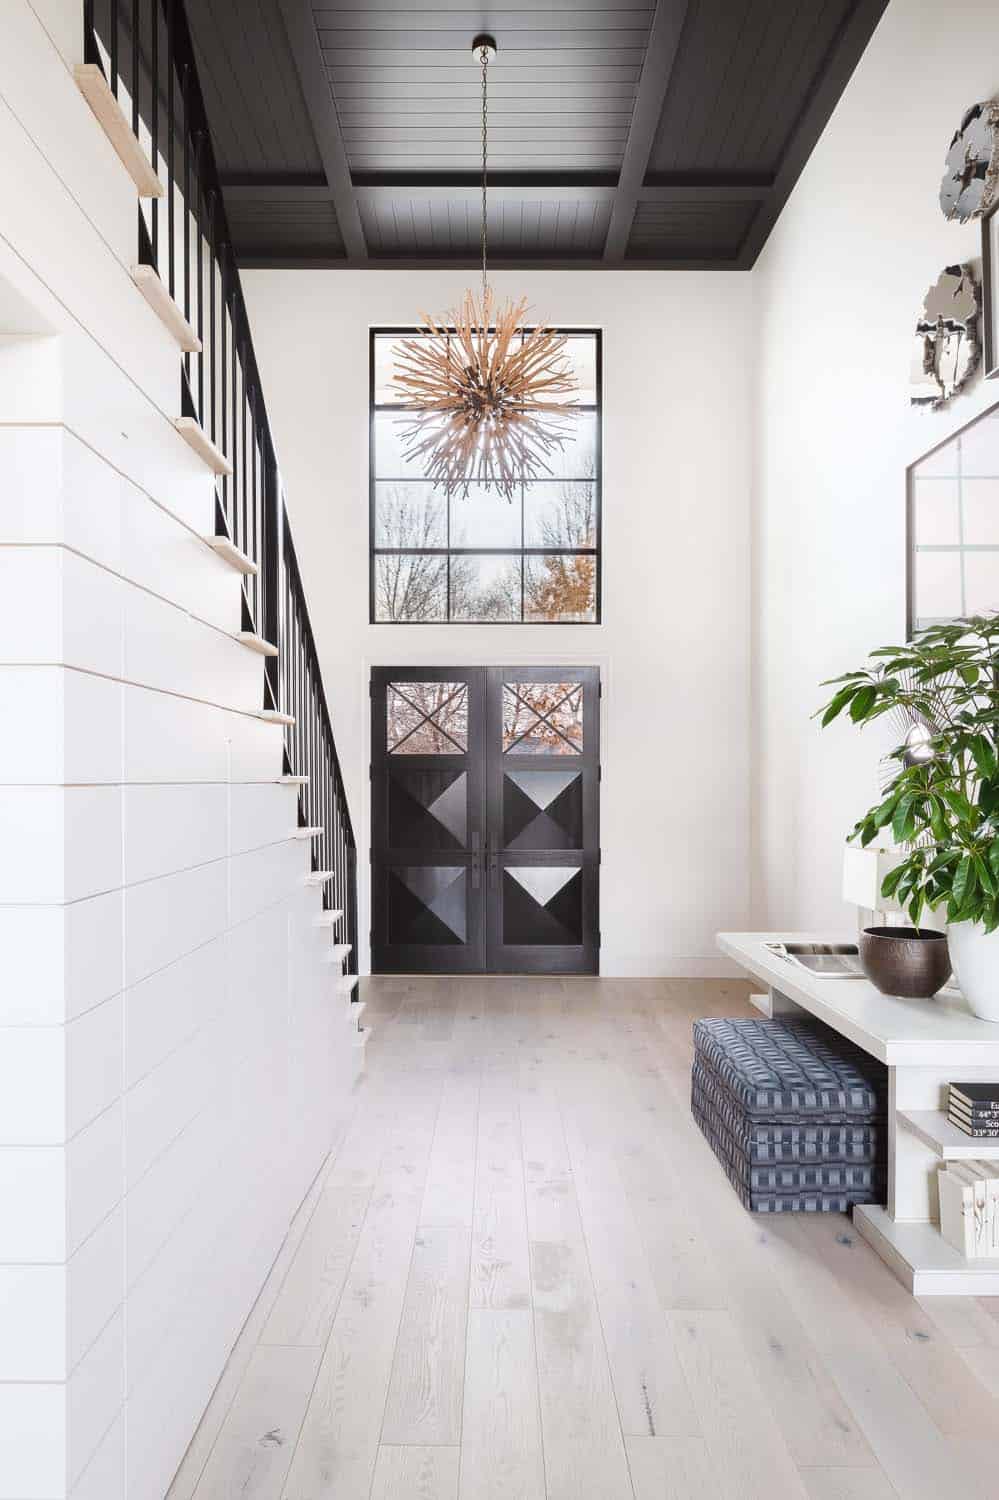 transitional style home statement entry